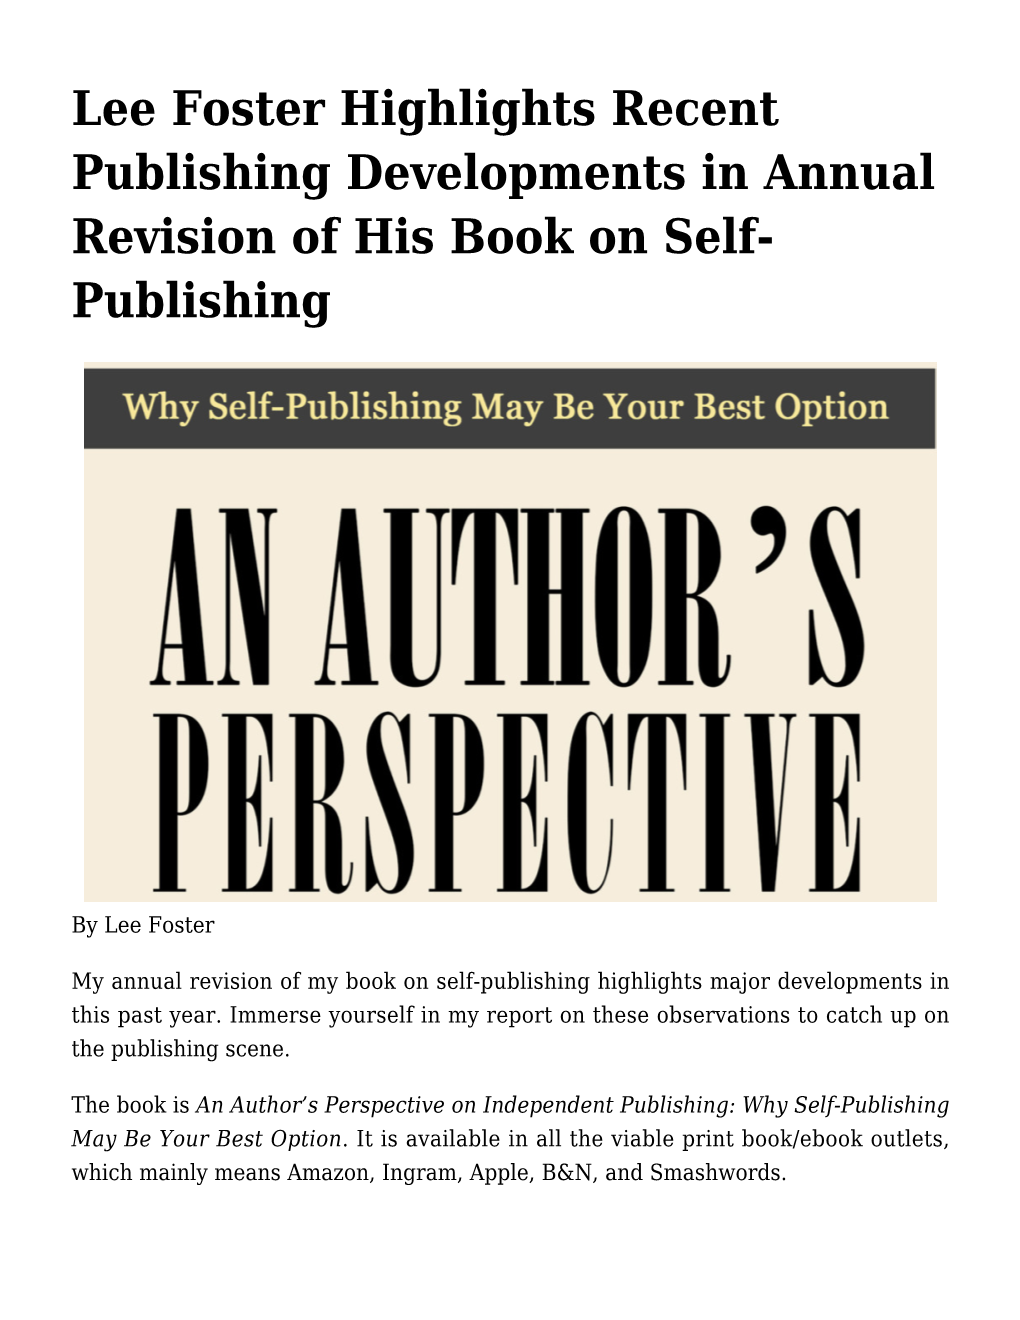 Lee Foster Highlights Recent Publishing Developments in Annual Revision of His Book on Self- Publishing